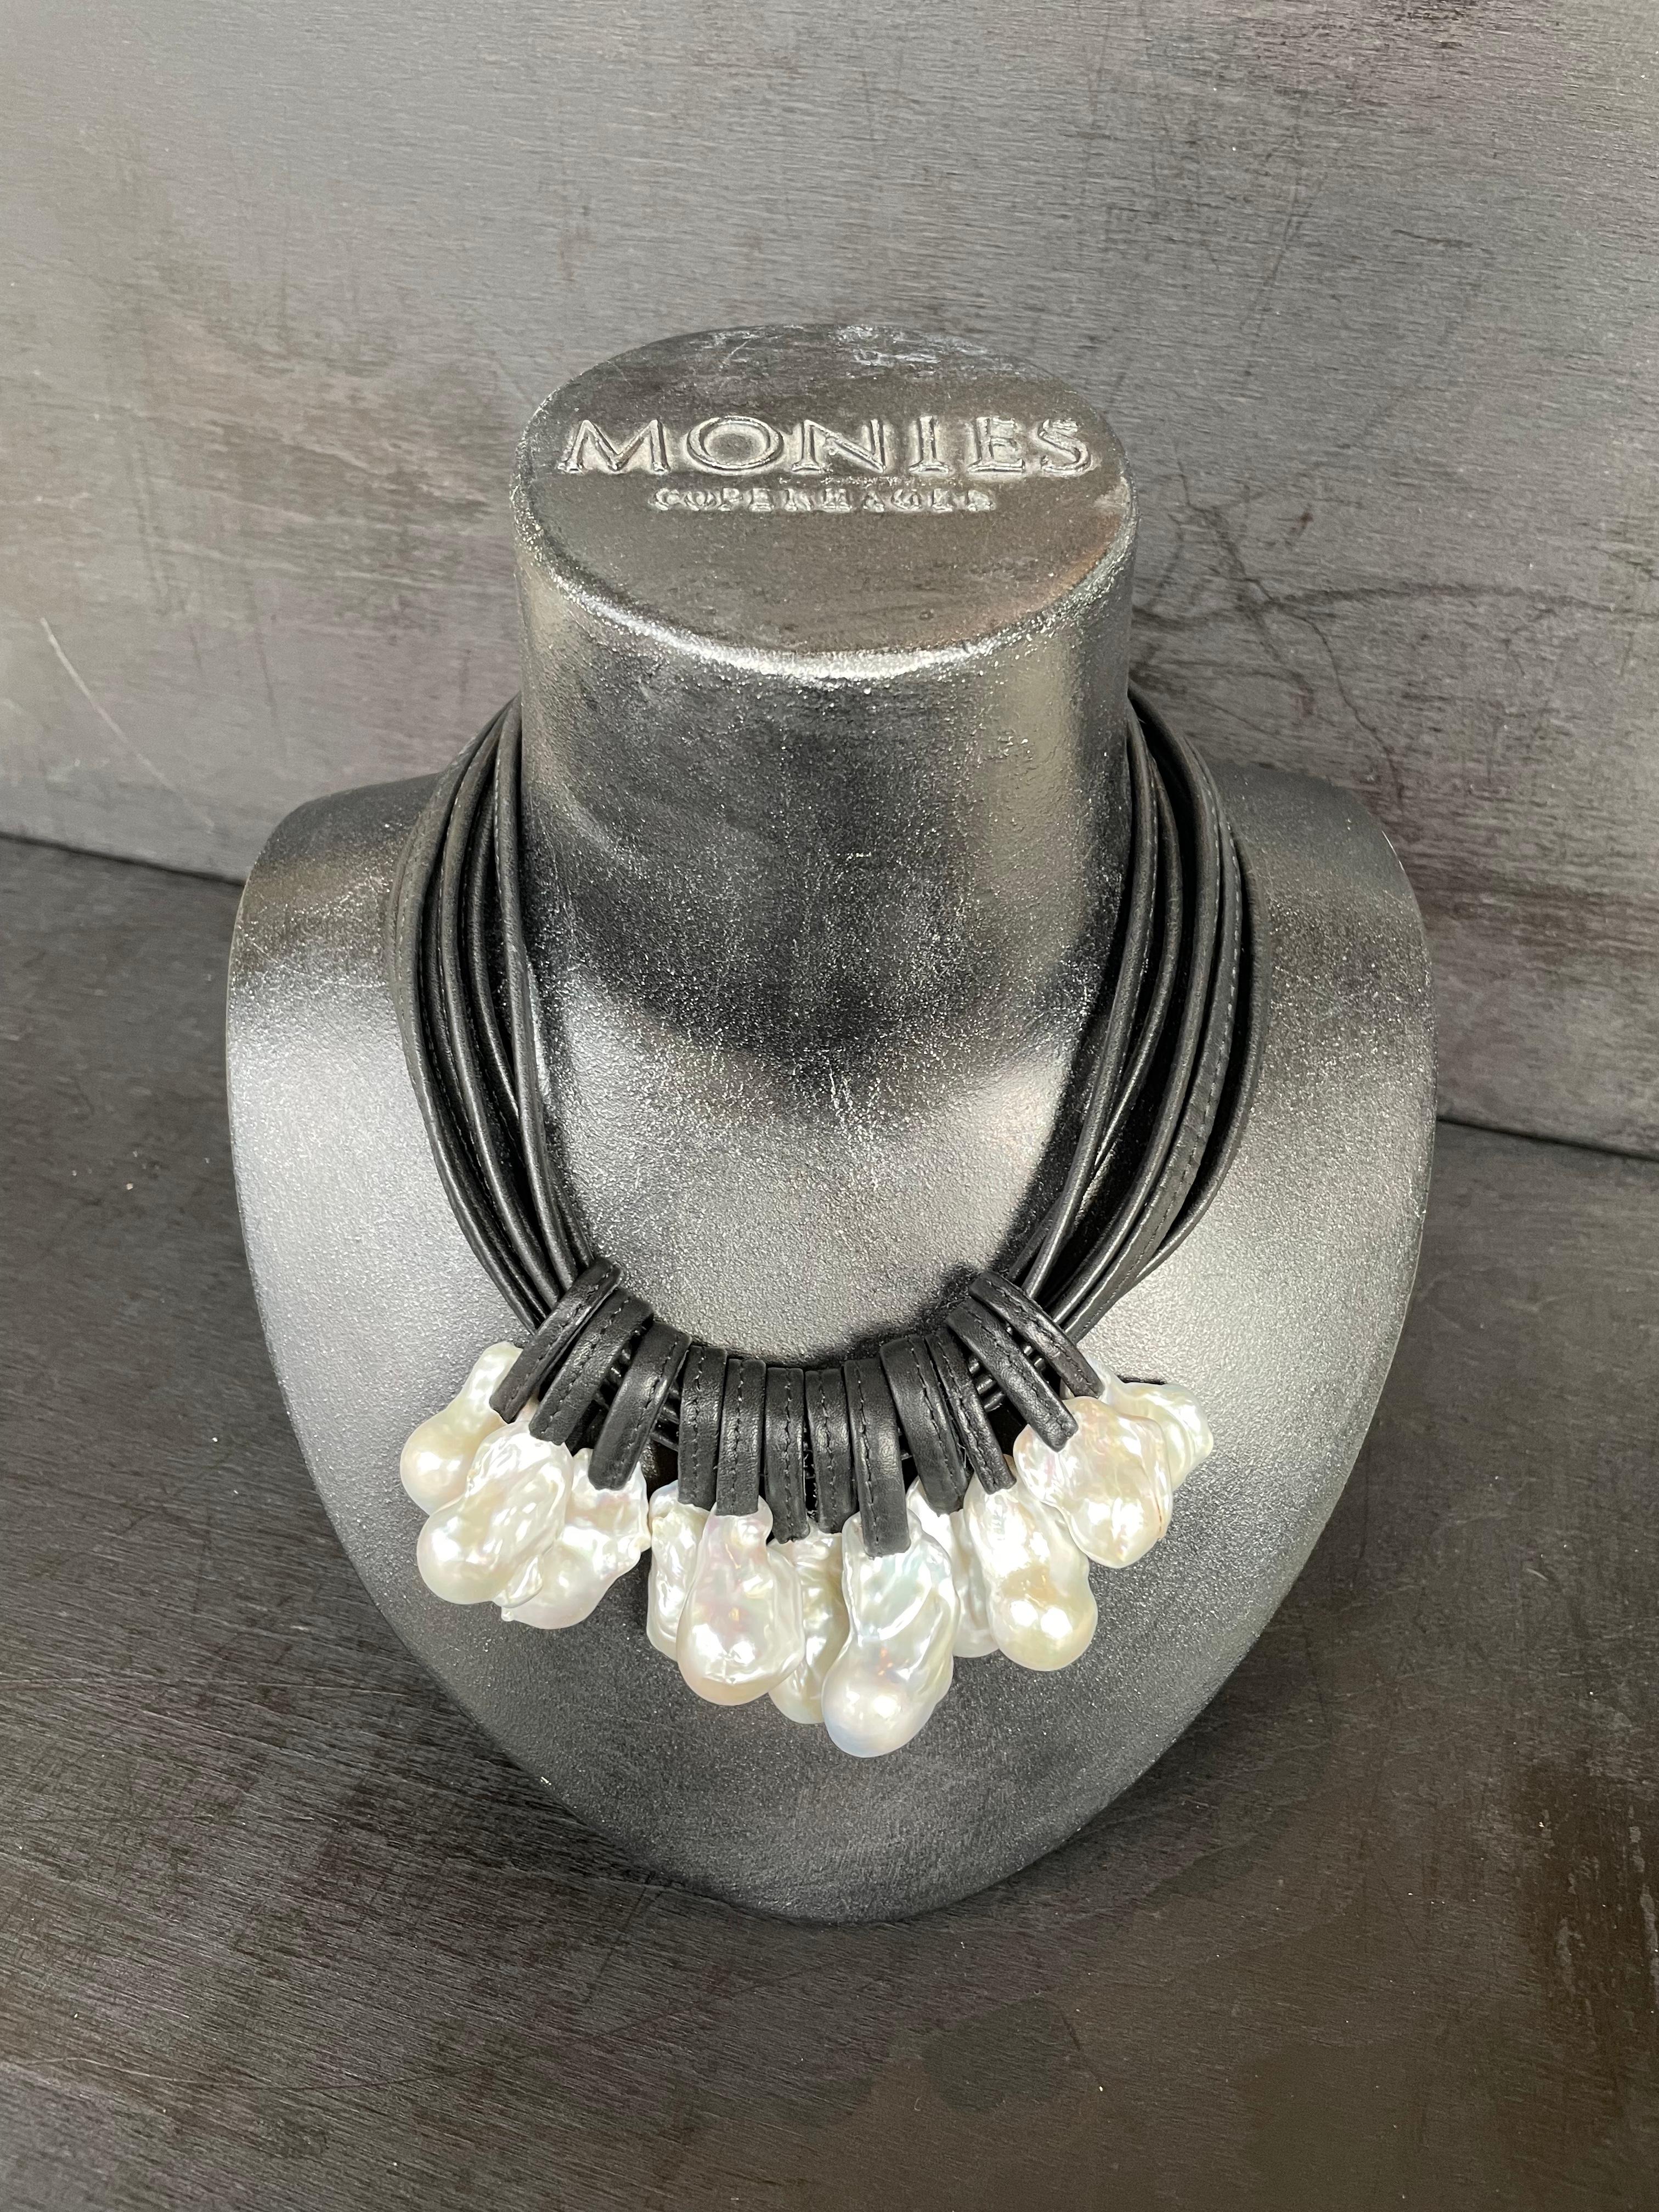 One-of-a-kind statement necklace from the Danish jewellery brand, Monies. 
Made in baroque pearls, leather and ebony, with a leather clasp. 

Handcrafted in the Monies Atelier in Copenhagen.